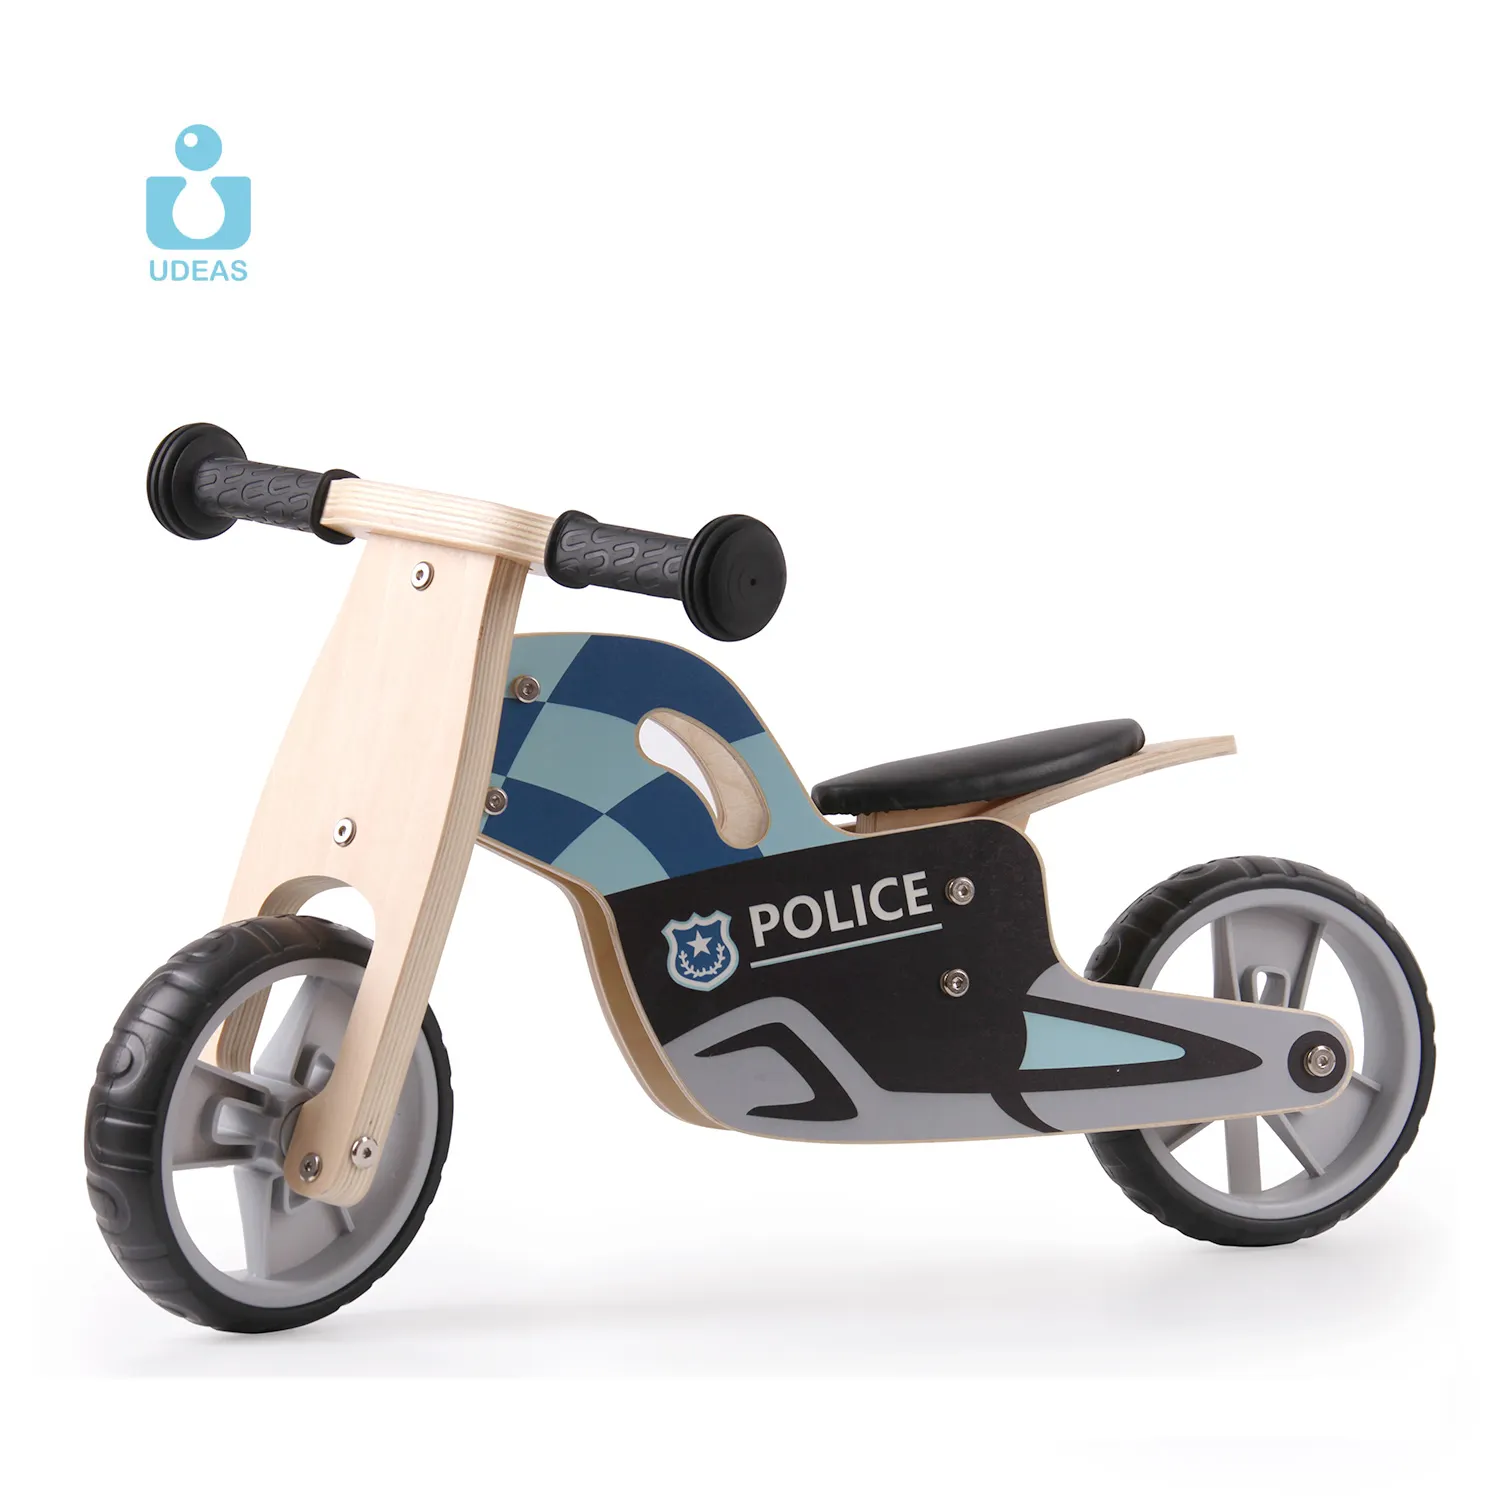 UDEAS 3 in 1 police balance bicycle toddlers wooden bike balance for children